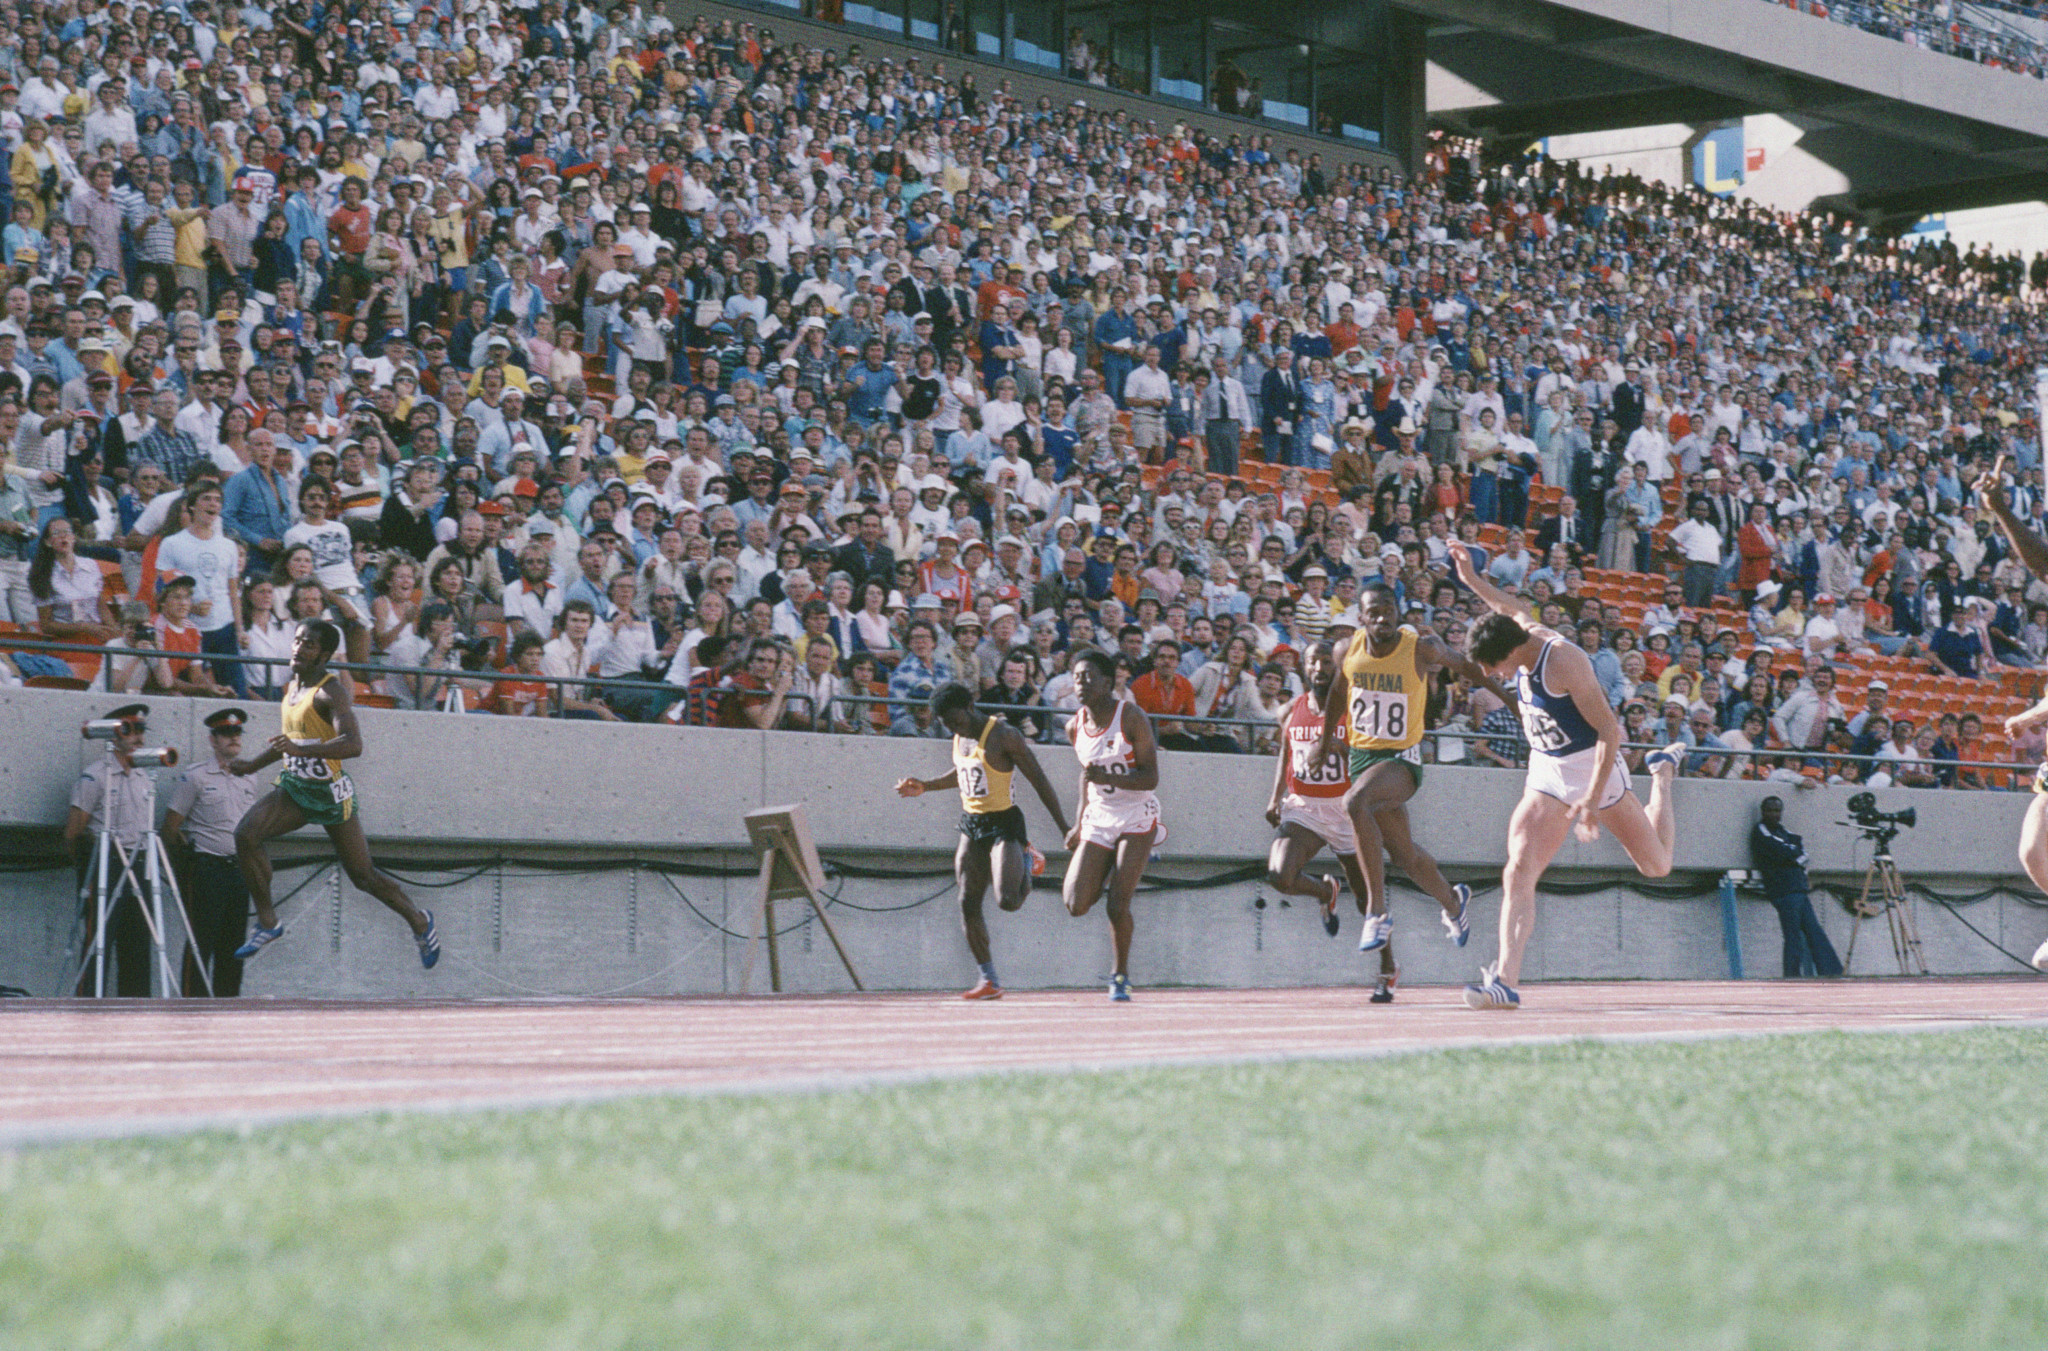 Edmonton hosted the 1978 Commonwealth Games ©Getty Images